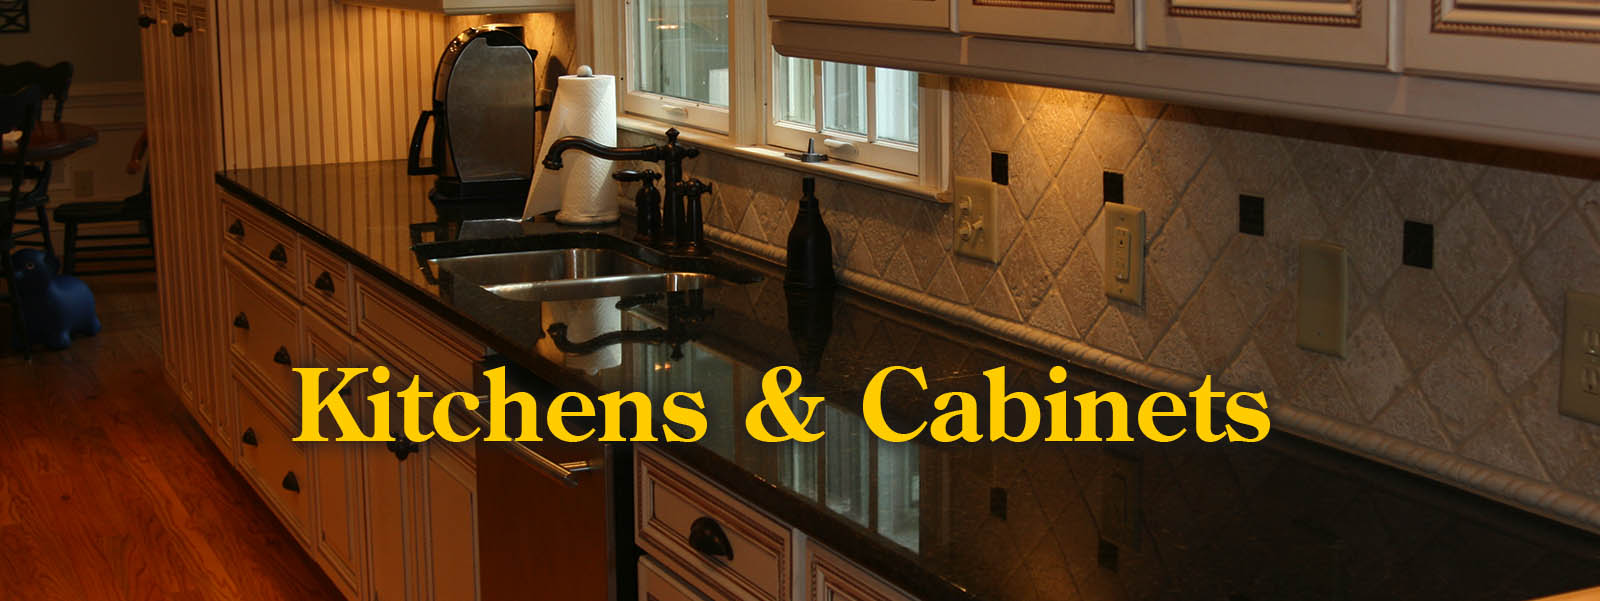 Kitchen & cabinetry remodeling